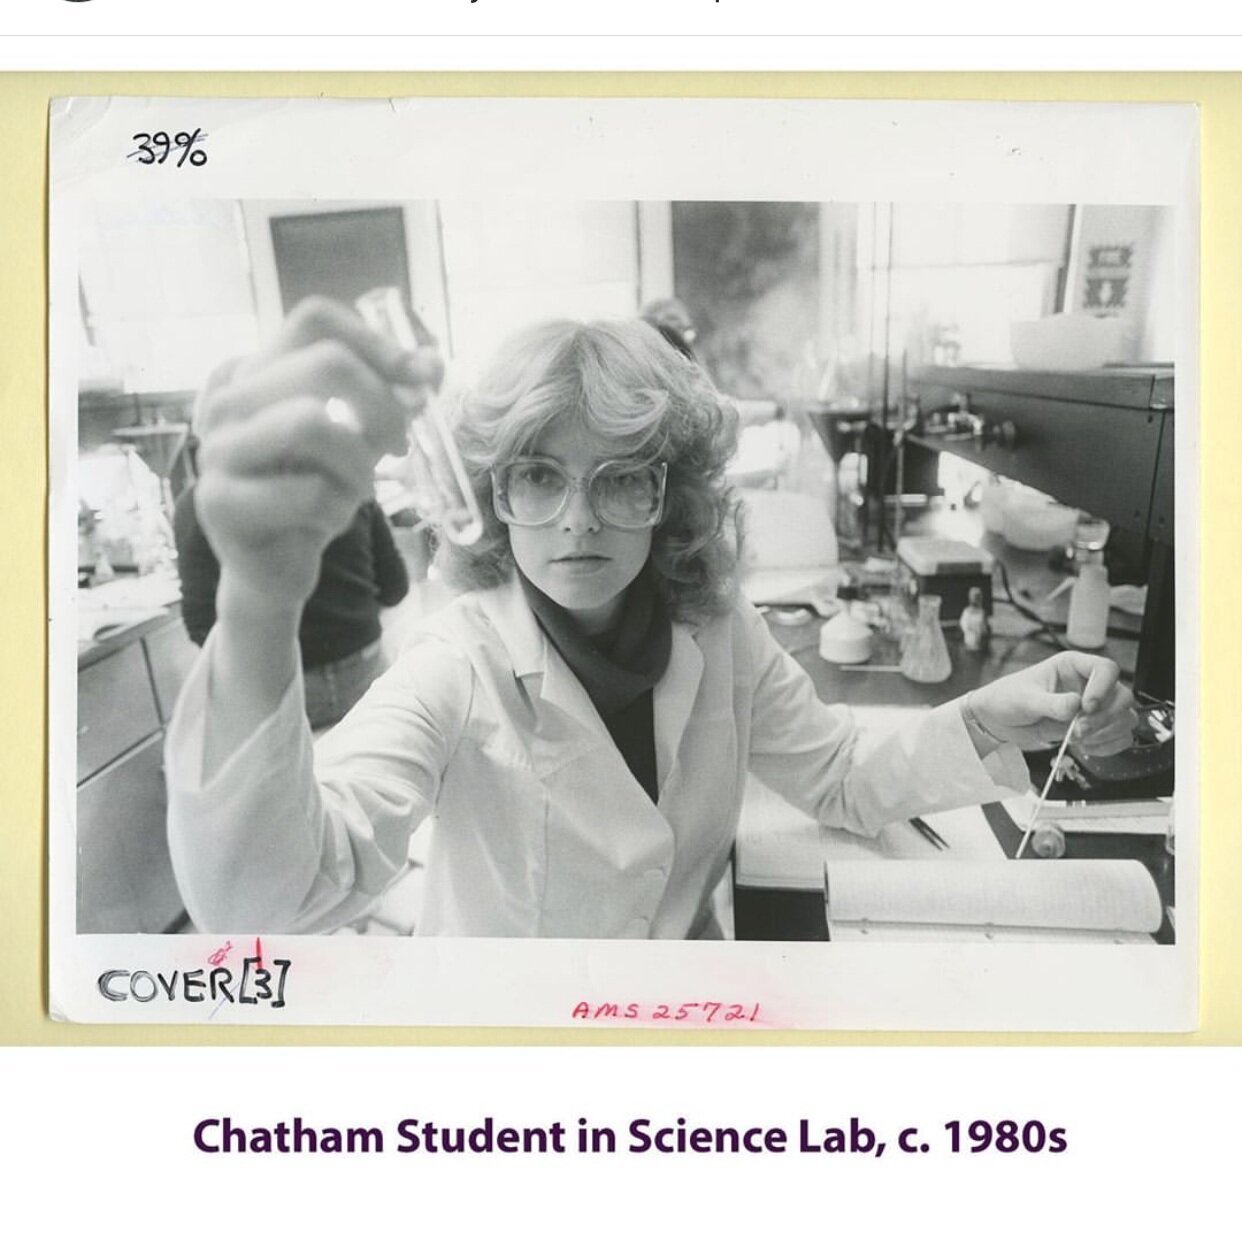 The Chatham University Archives and Special Collections